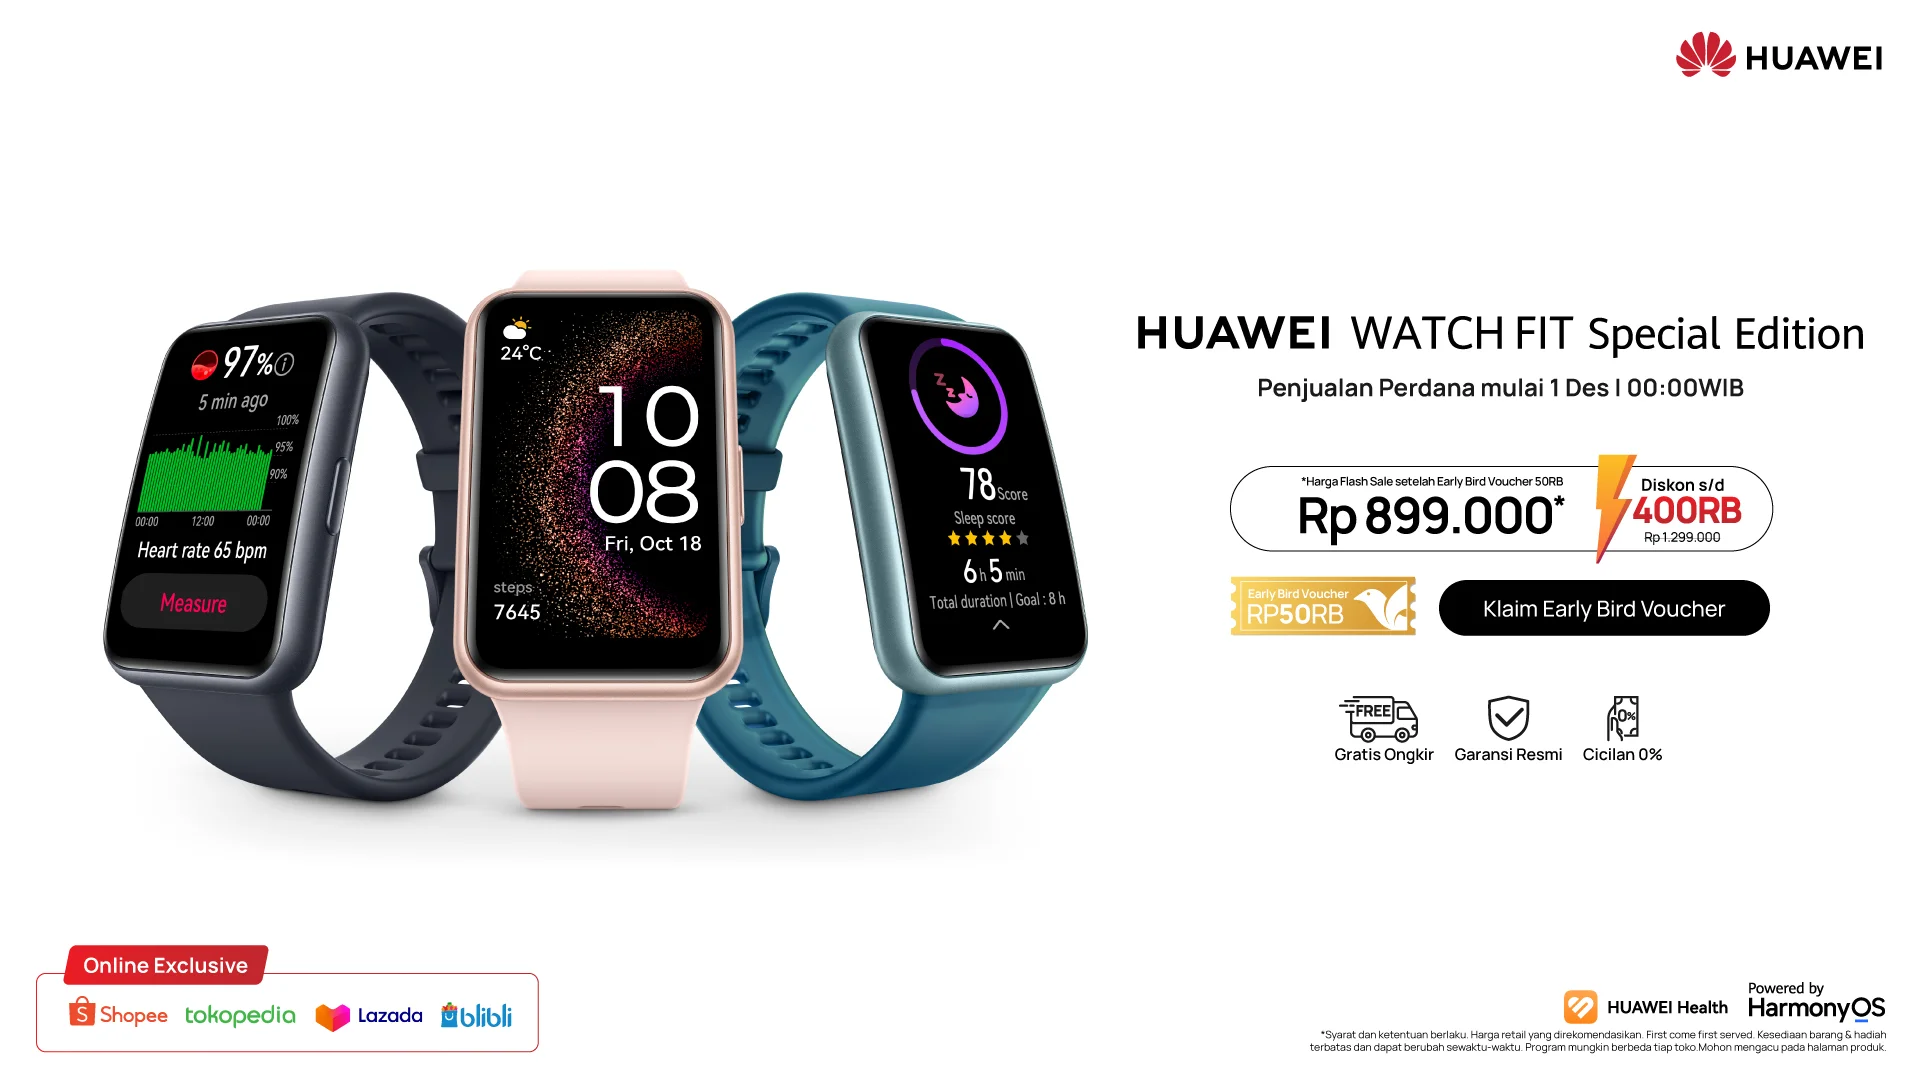 5-HUAWEI-WATCH-Fit-SE-Sales-Channel-_-Price